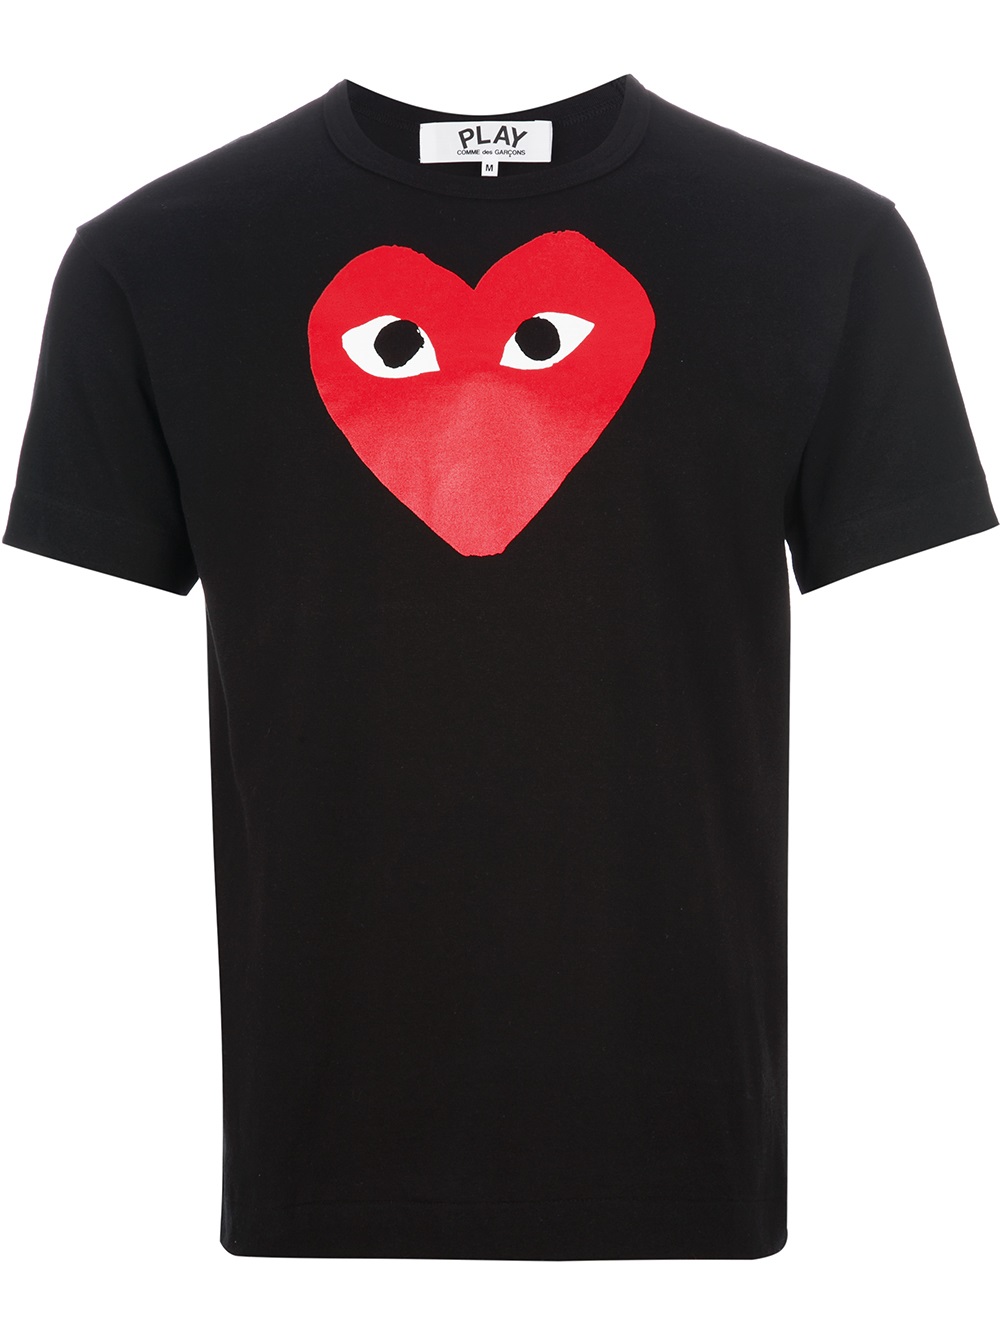 Play comme des garçons Comme Des Garçons Play 'red Play' T-shirt in ...